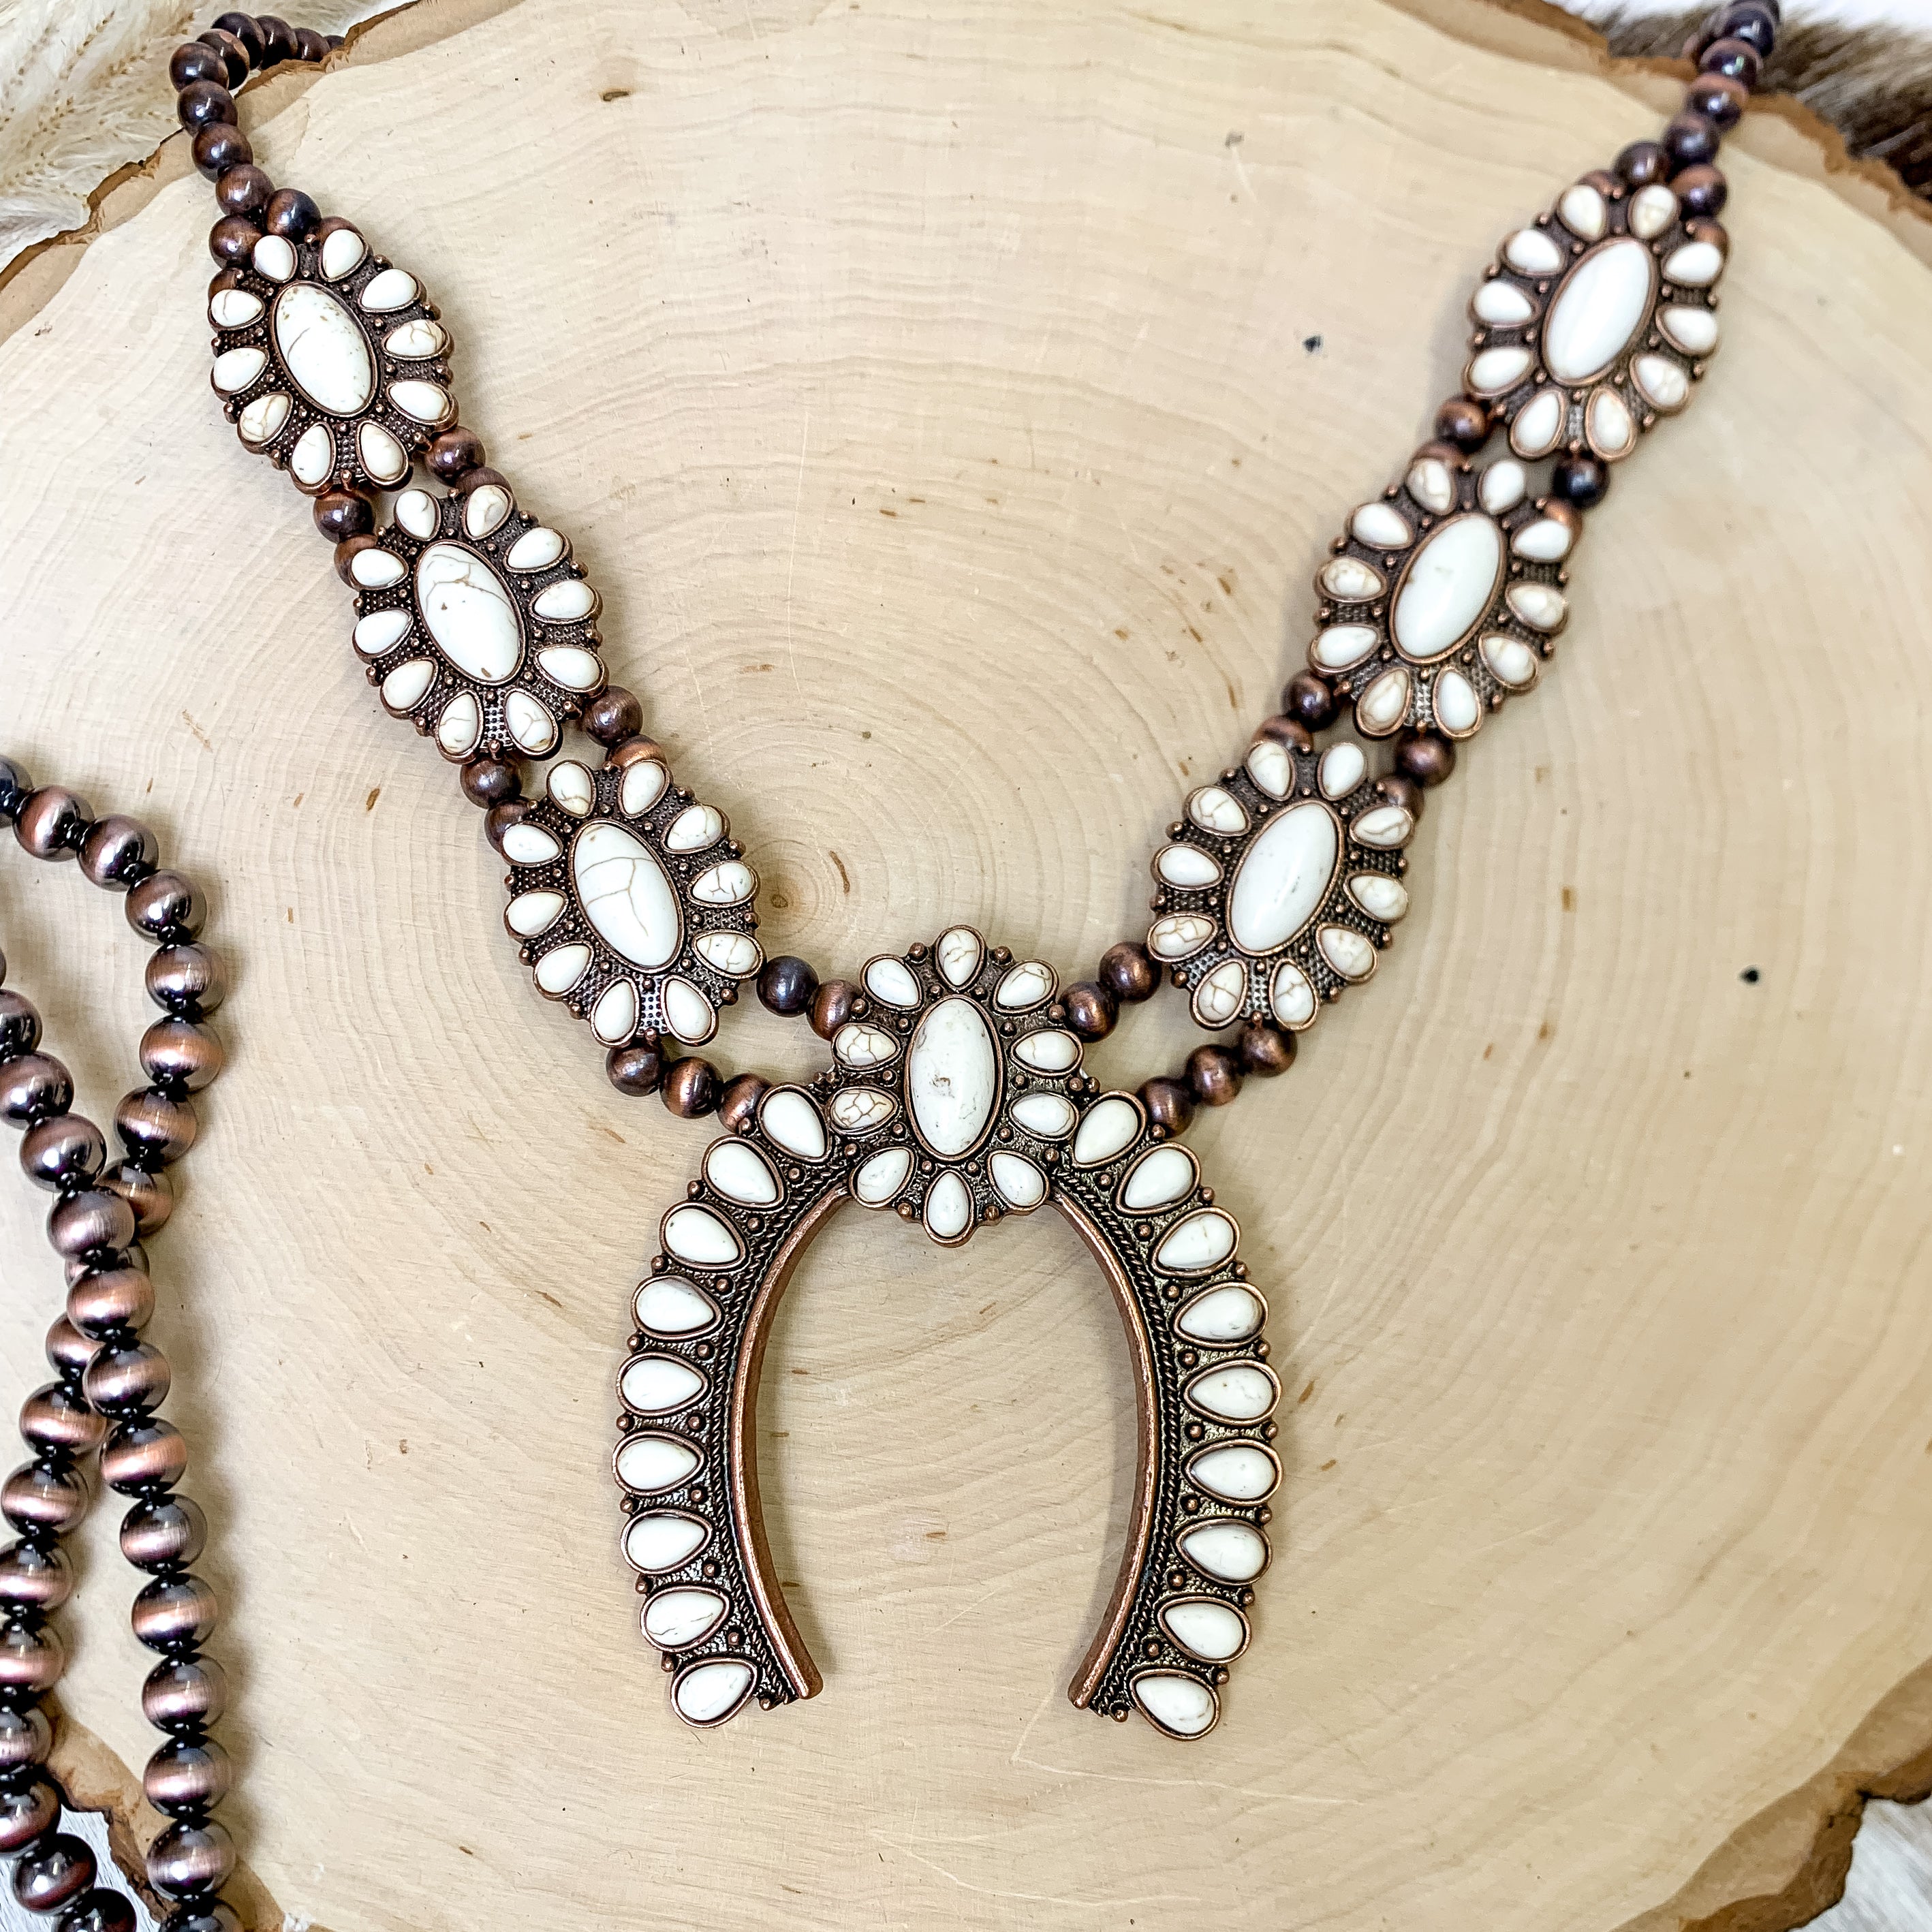 Copper Tone Faux Navajo Pearl Necklace With Stones and Naja Pendant in Ivory